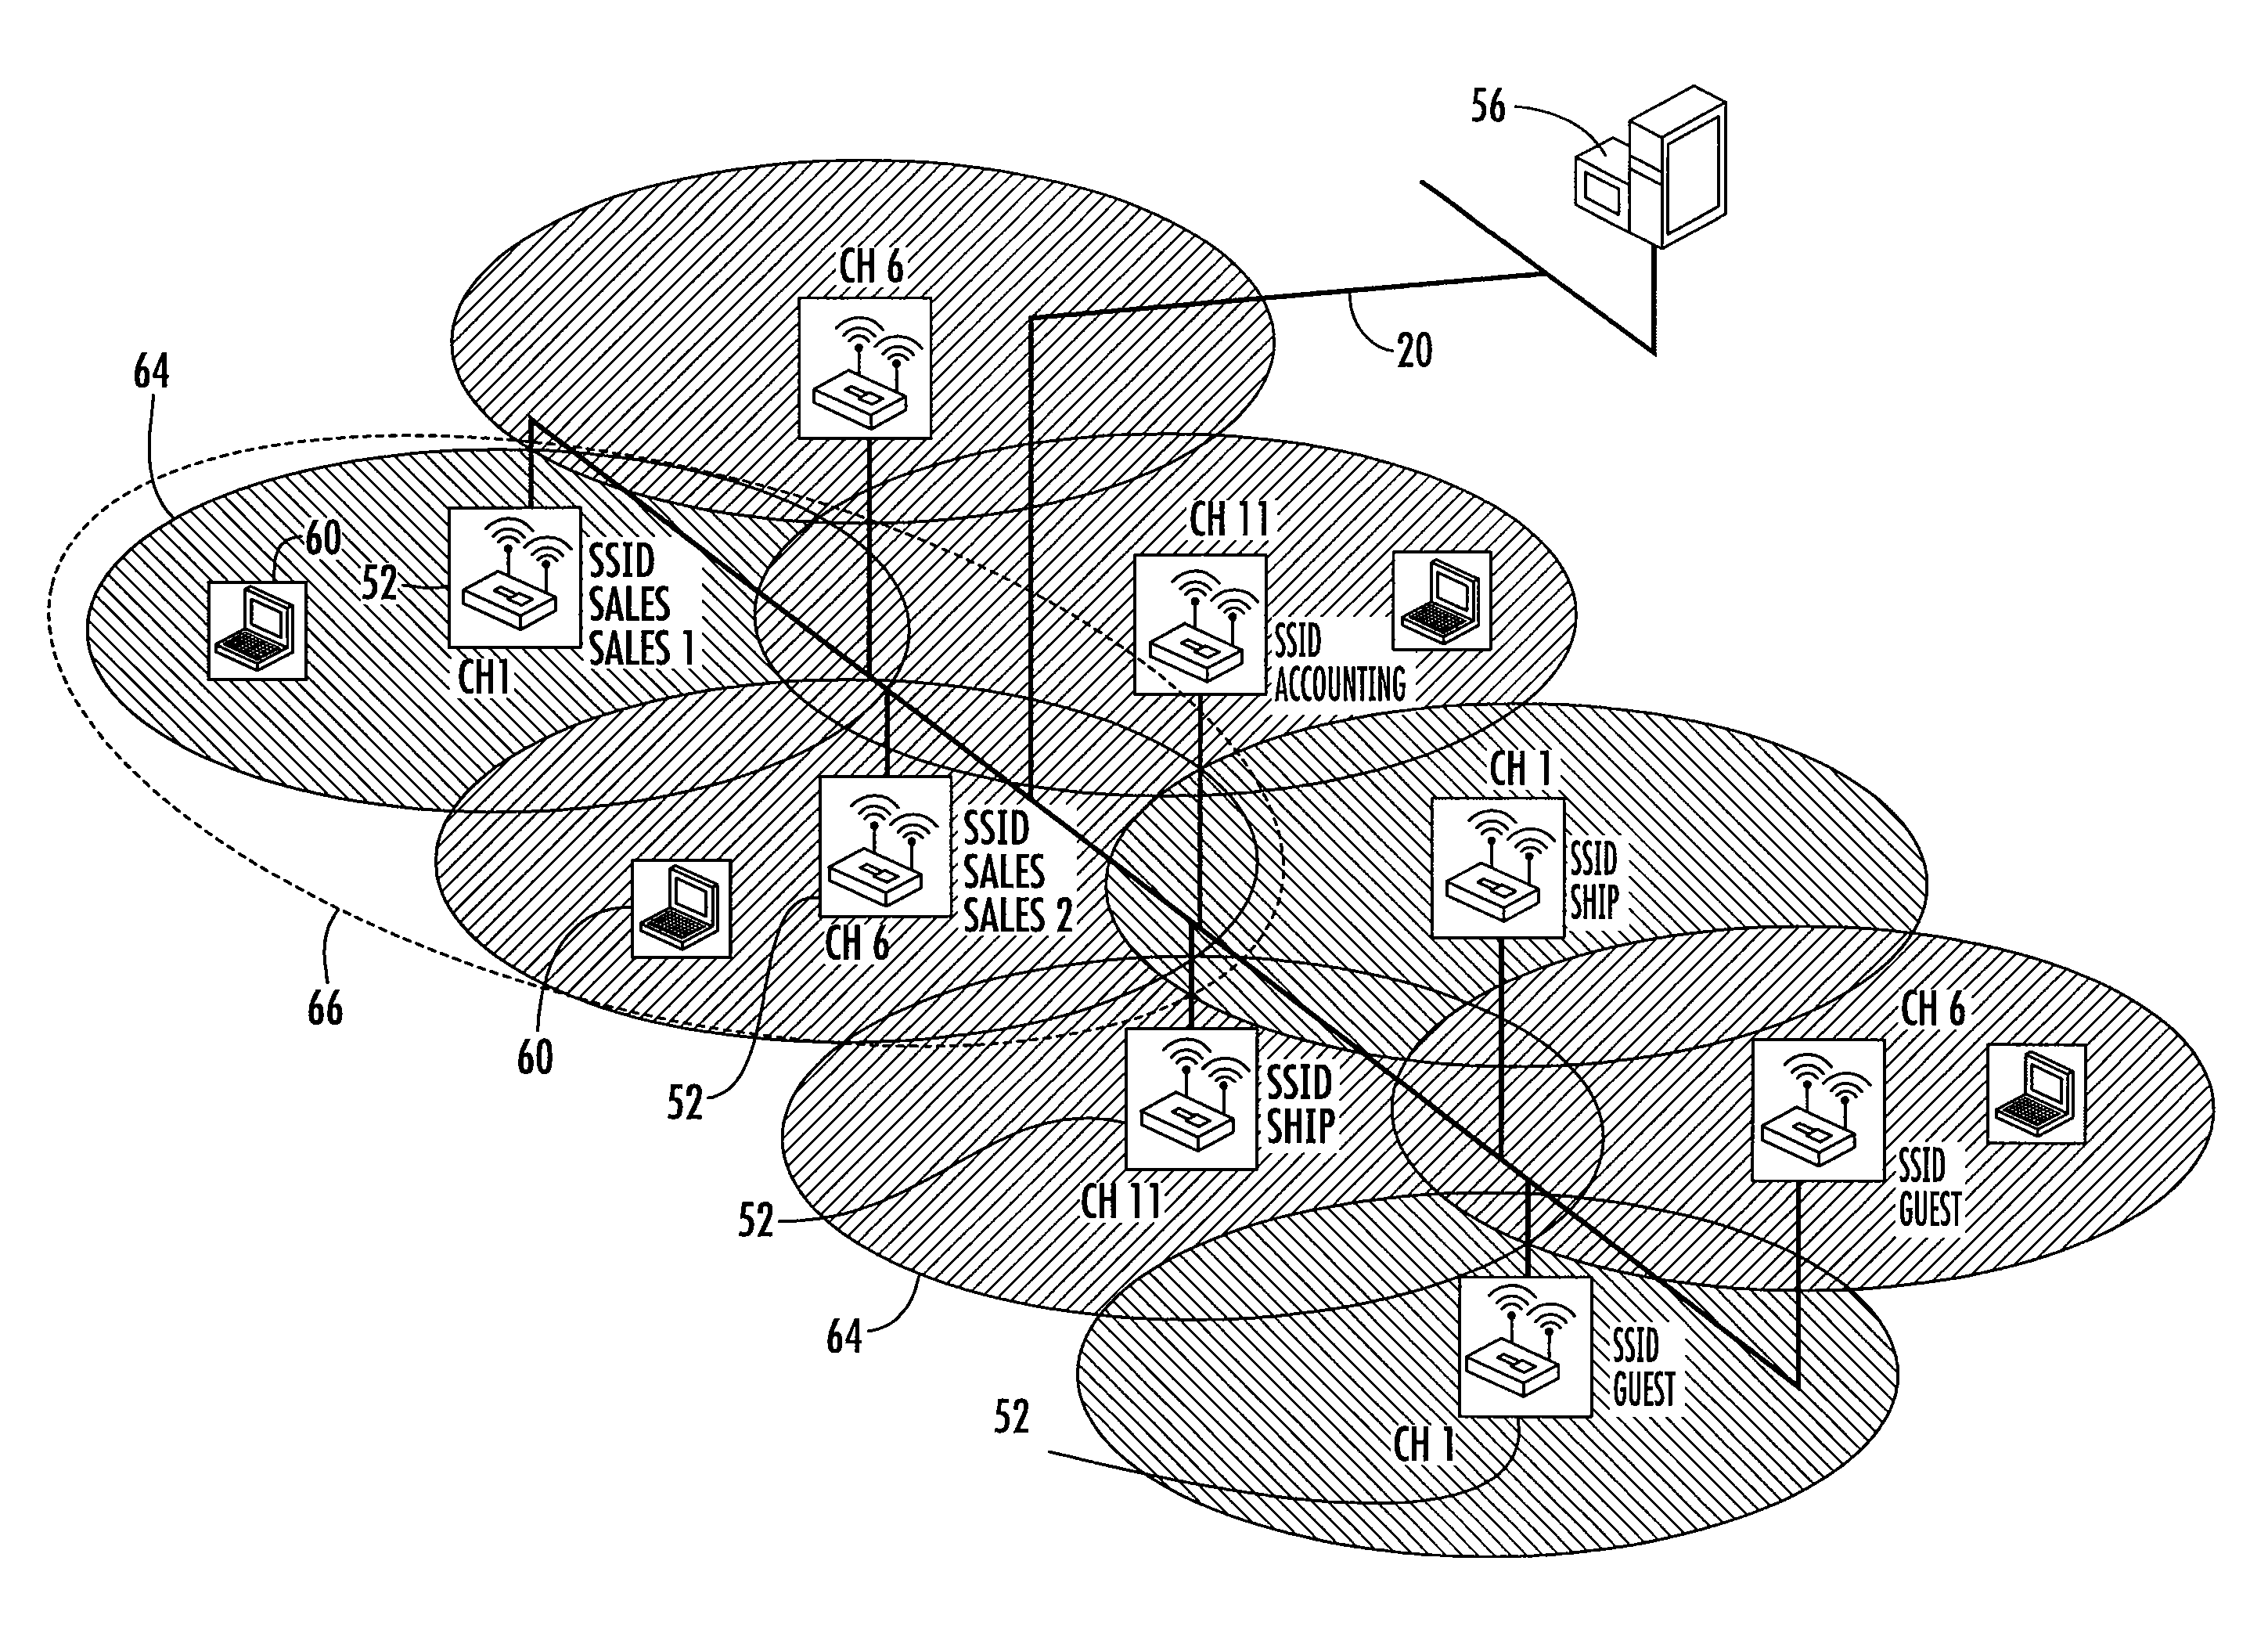 Method for detecting rogue devices operating in wireless and wired computer network environments